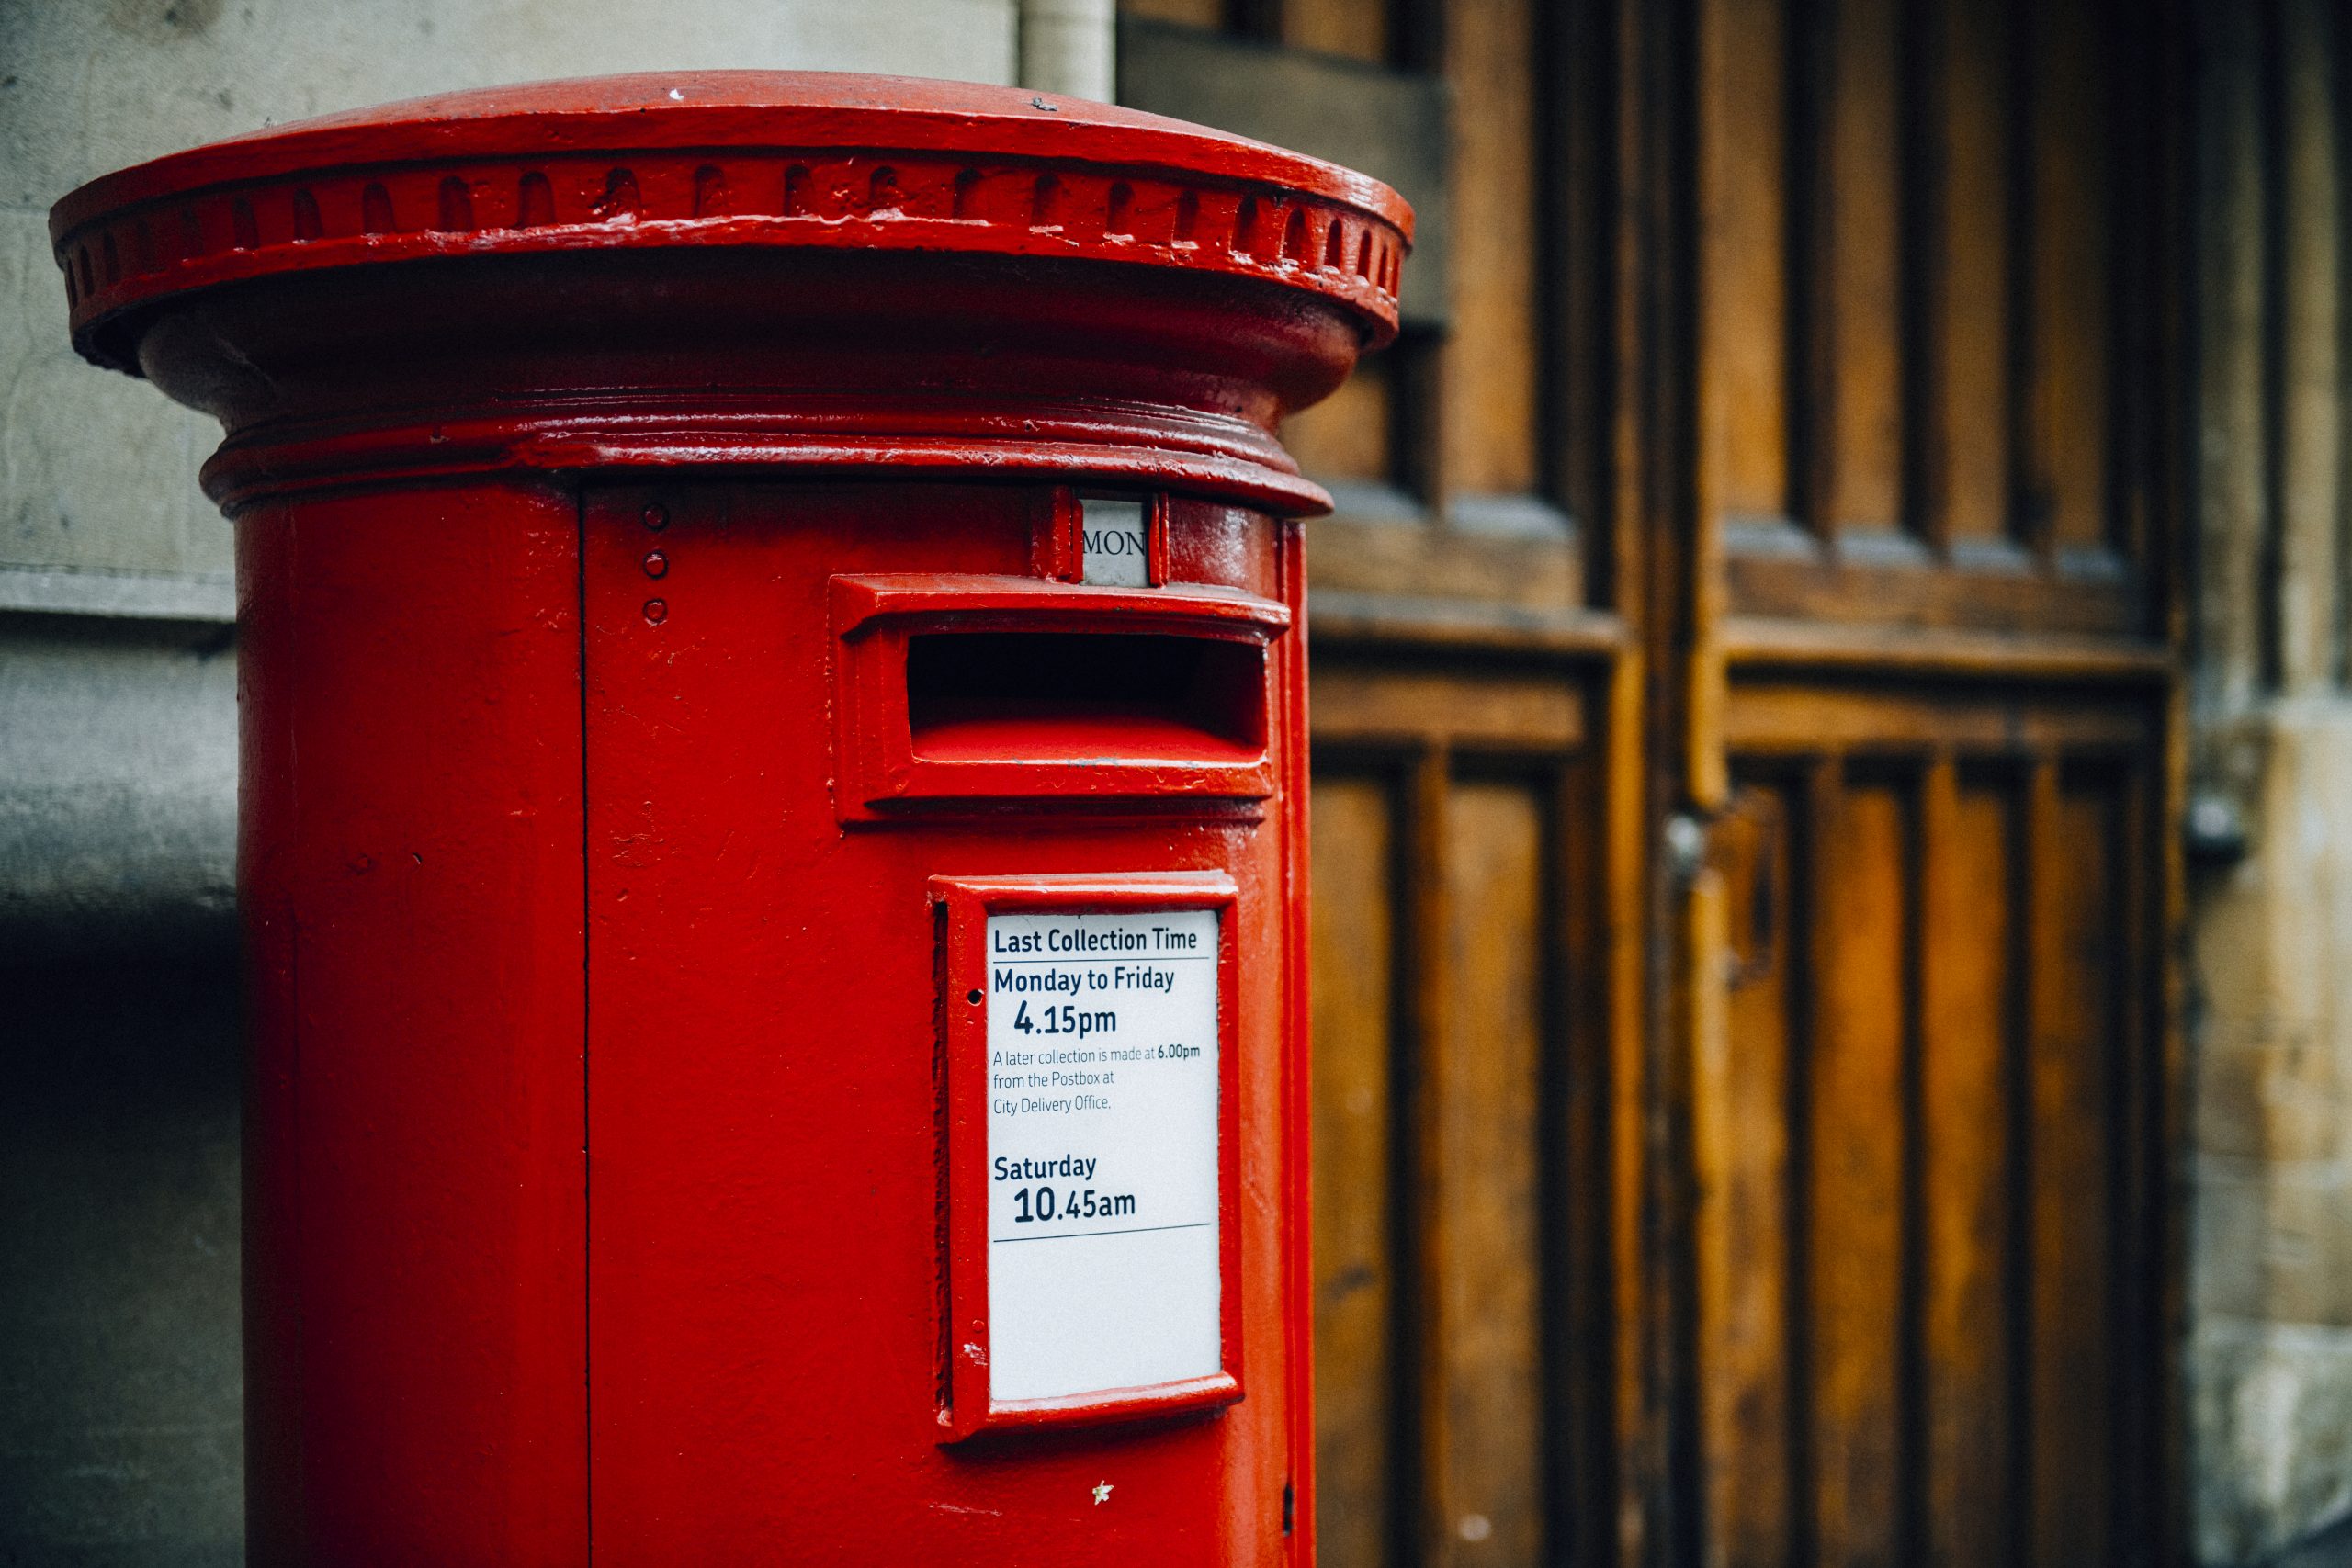 Iconic red British mailbox in a city